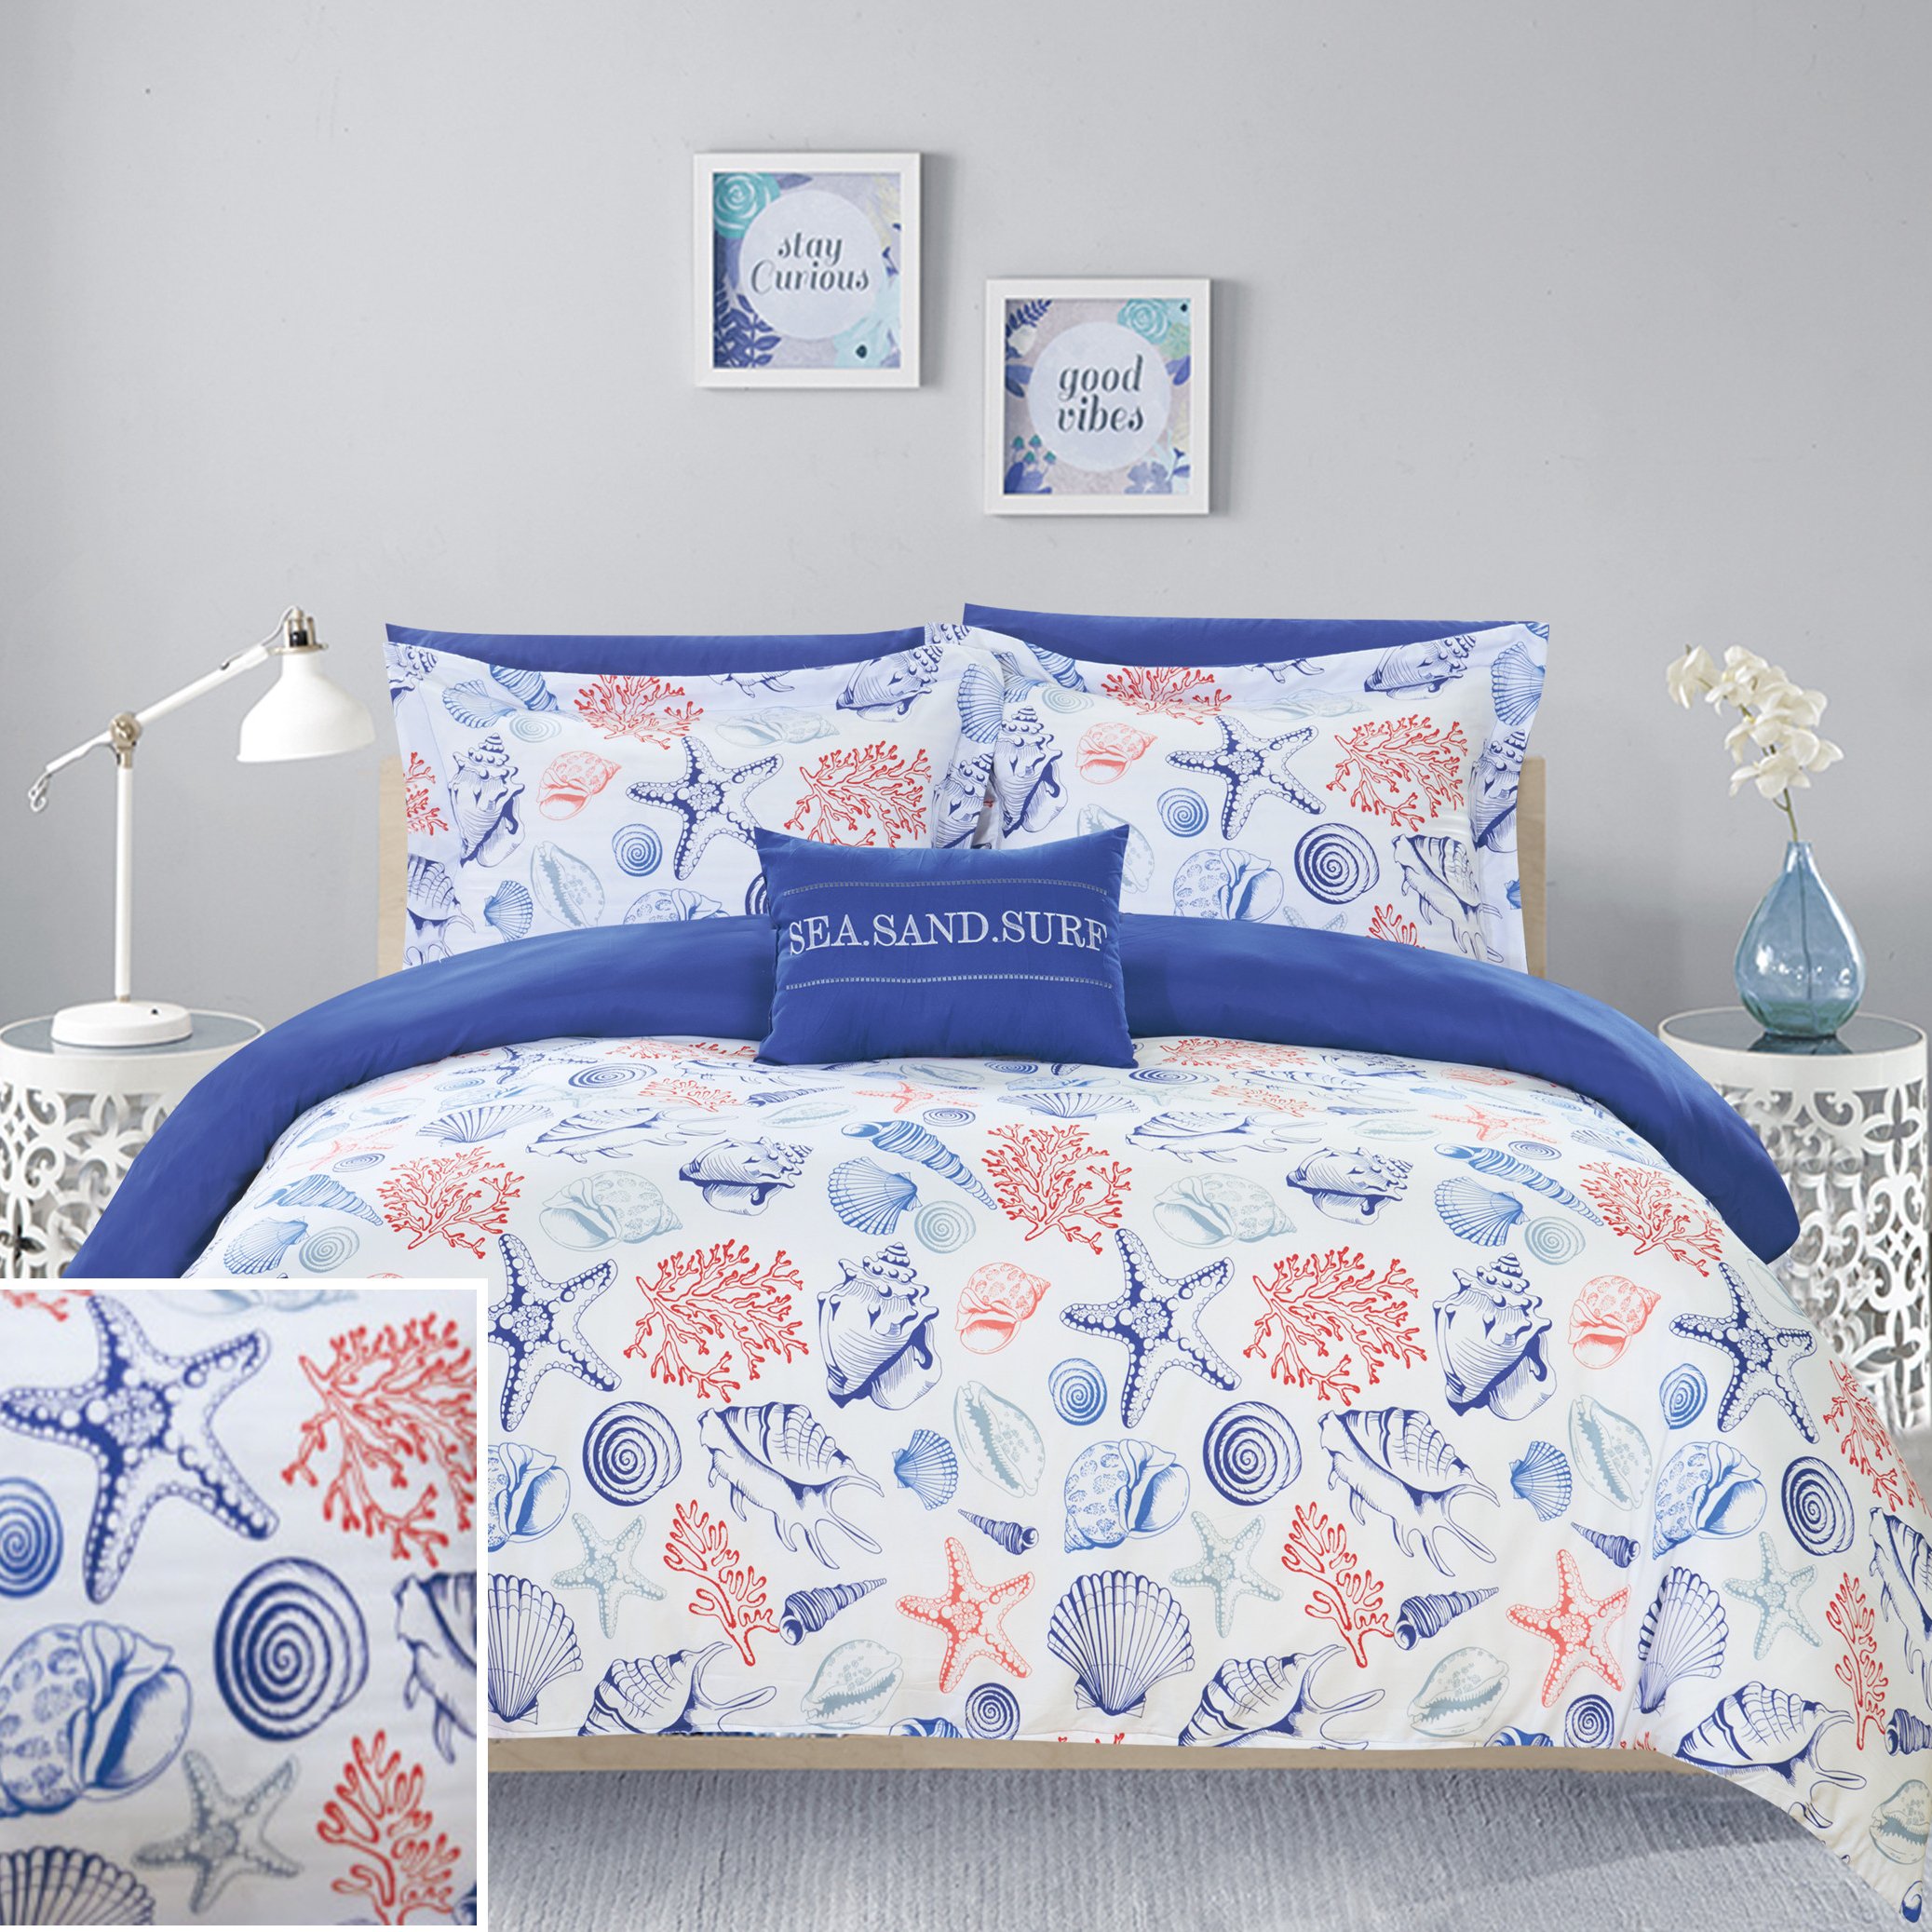 8 Or 6 Piece Reversible Comforter Set Sea, Sand, Surf Theme Print Design Bed In A Bag - Navy, Twin